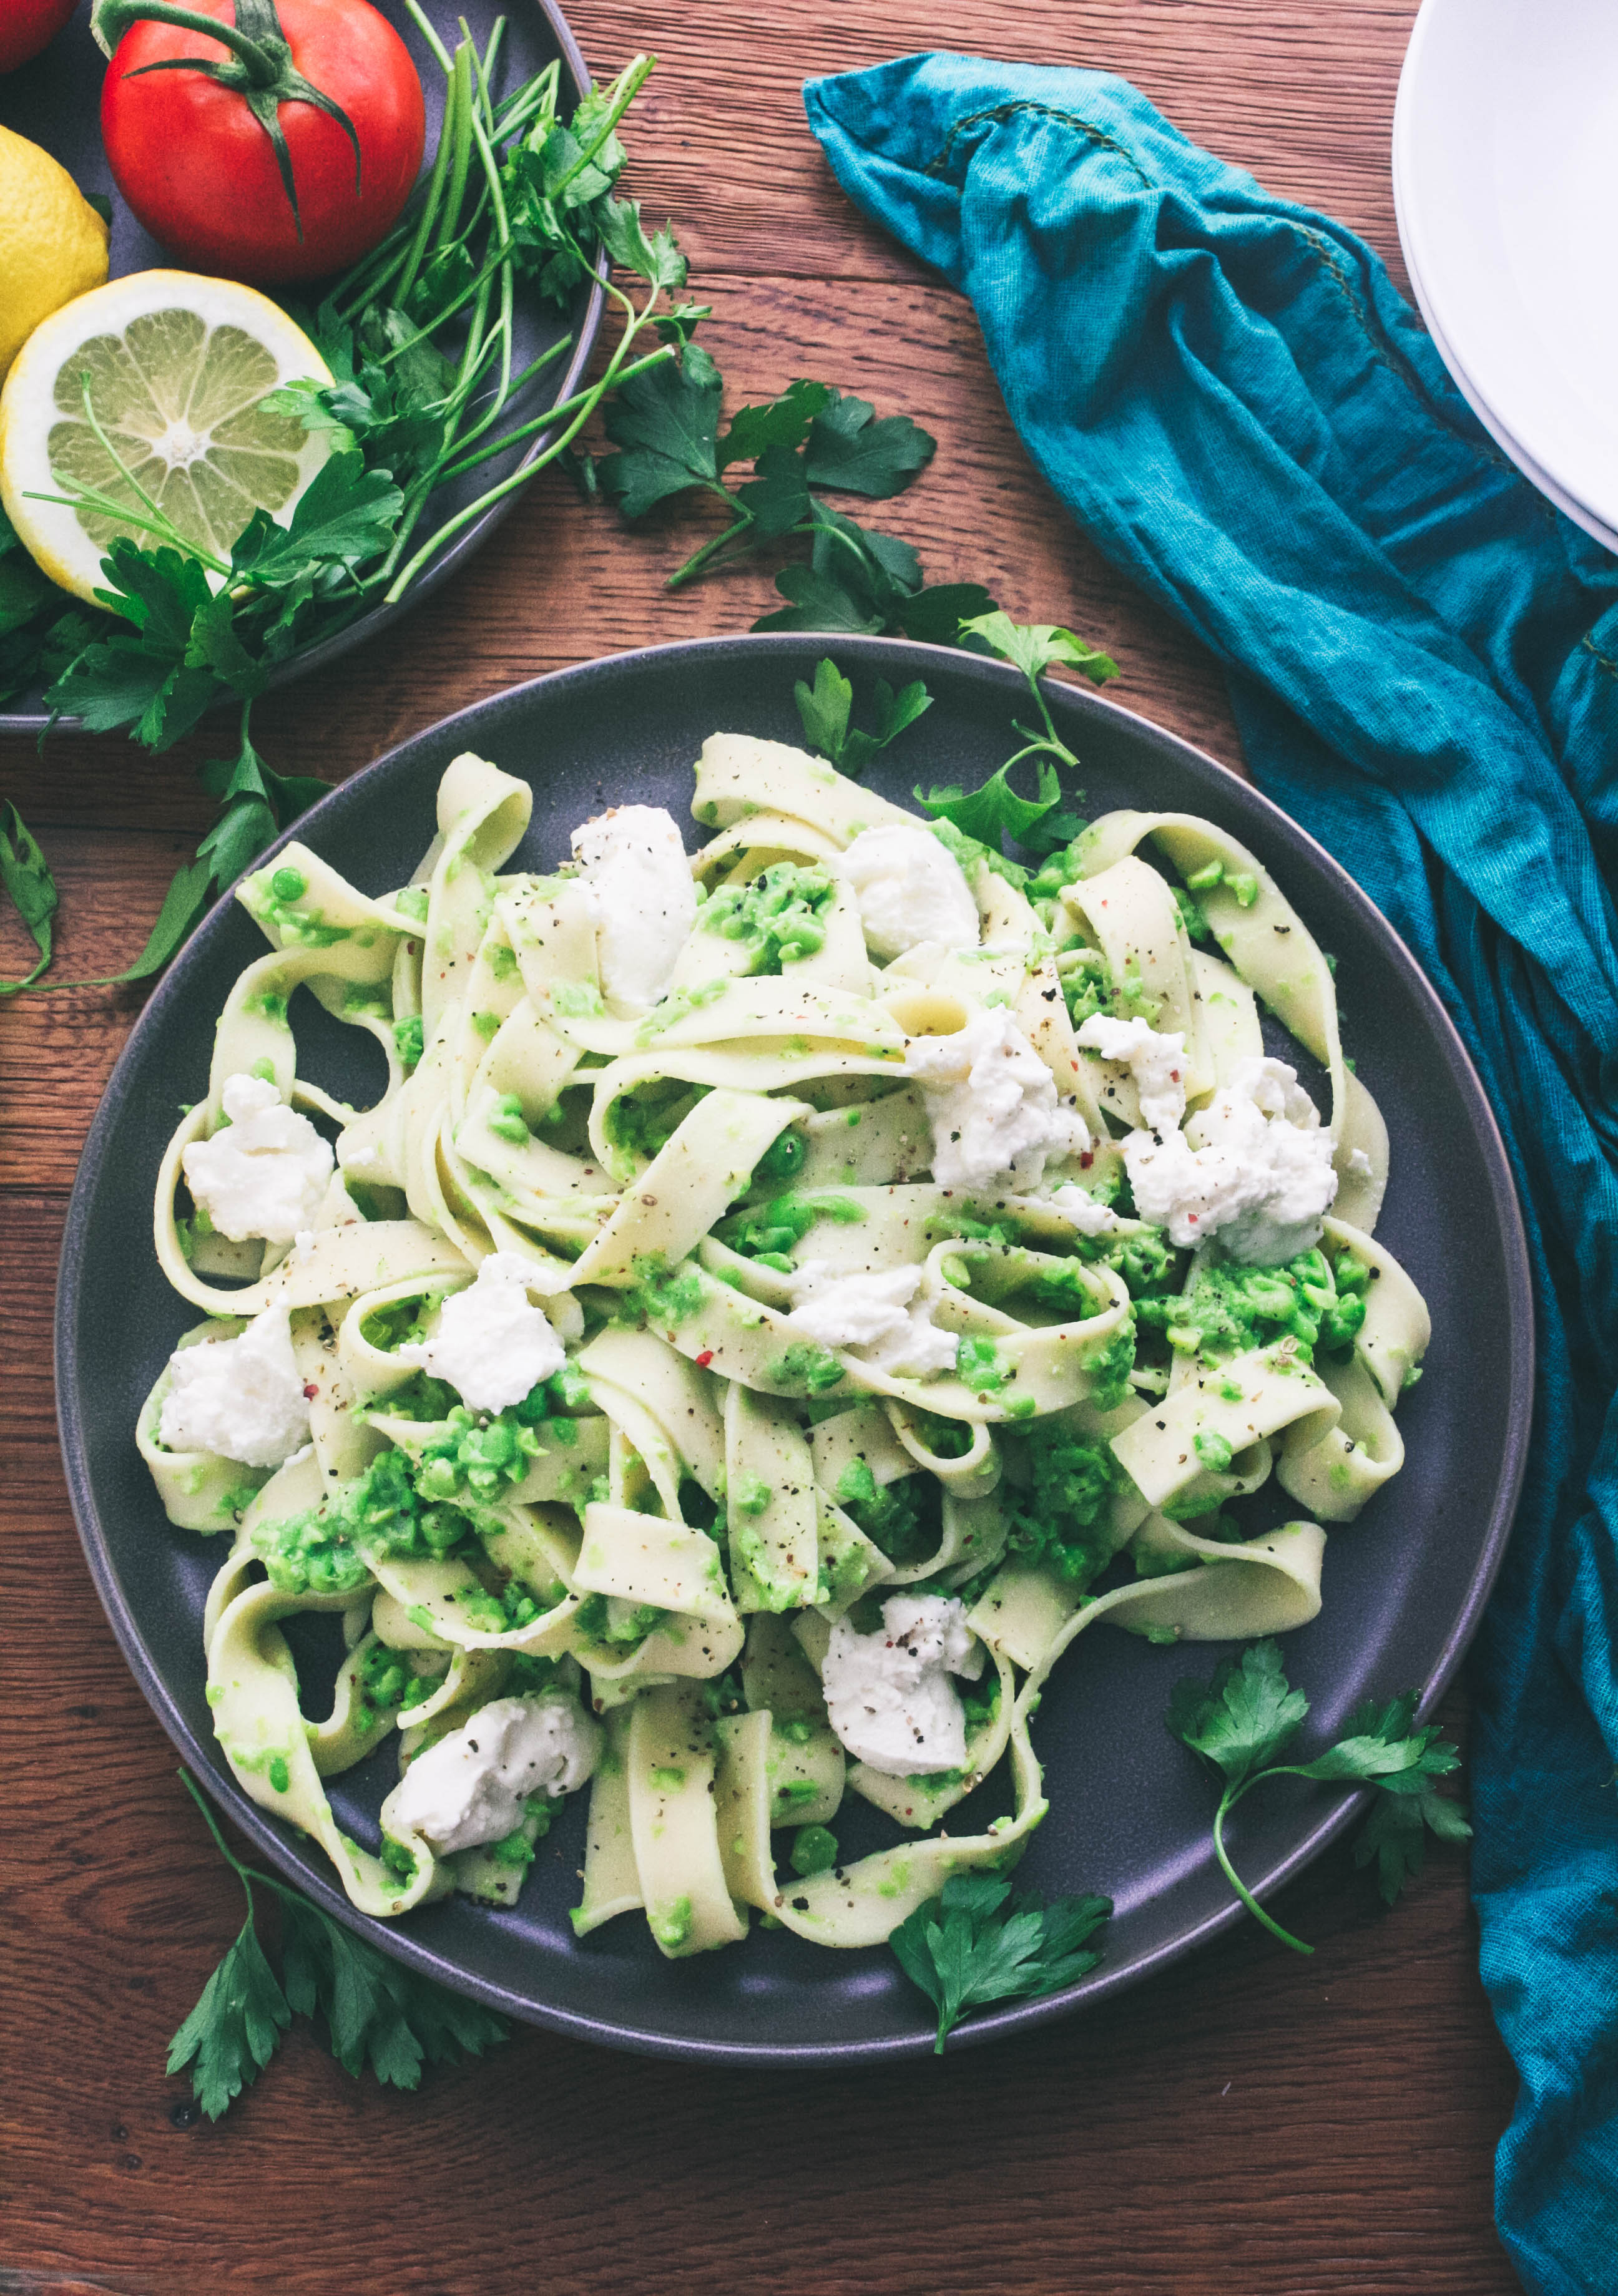 Pasta with Smashed Peas and Ricotta is a lovely, fresh dish for any night. Pasta with Smashed Peas and Ricotta is a simple dish you'll really enjoy.